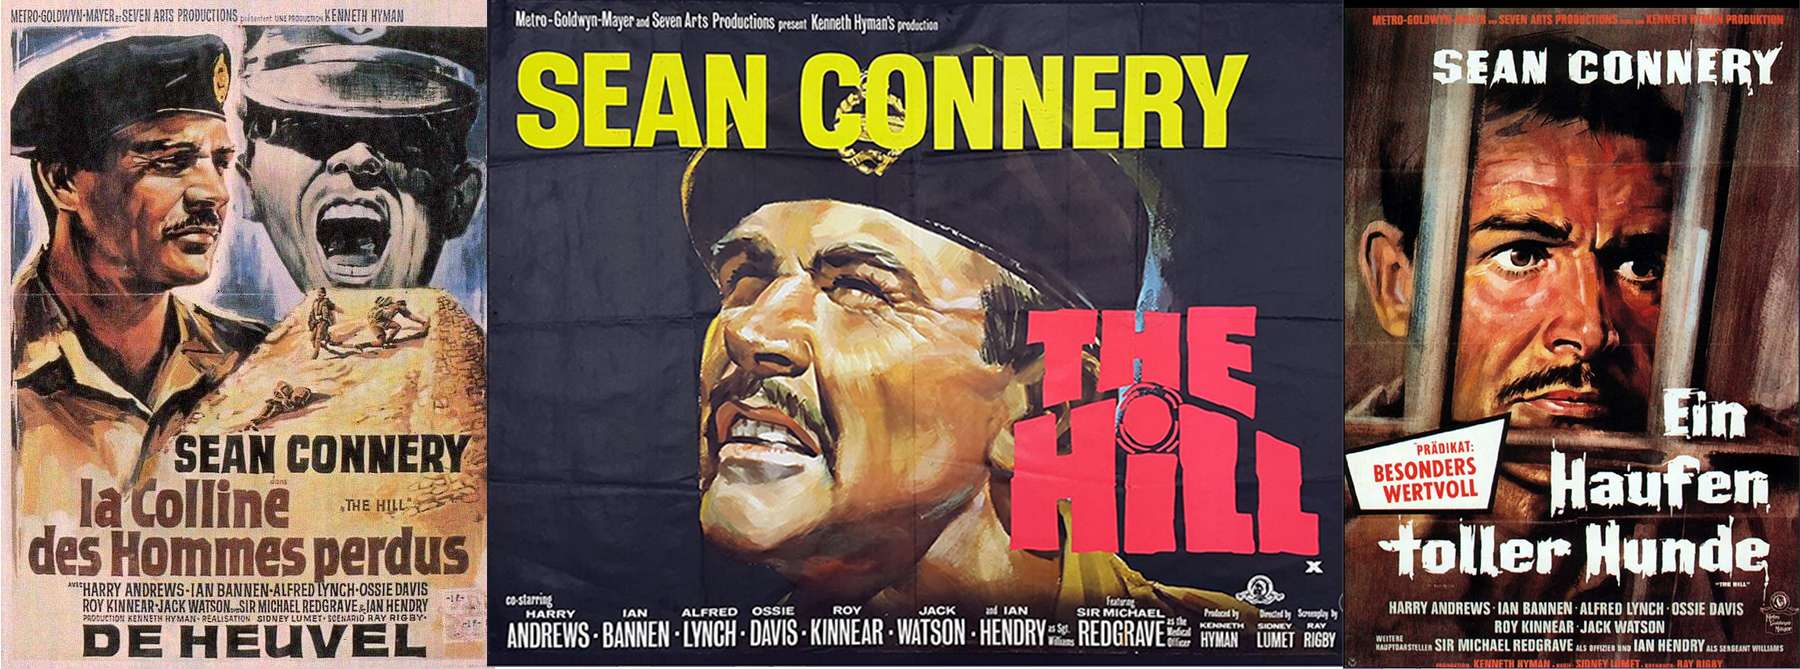 Sean Connery –The Hill